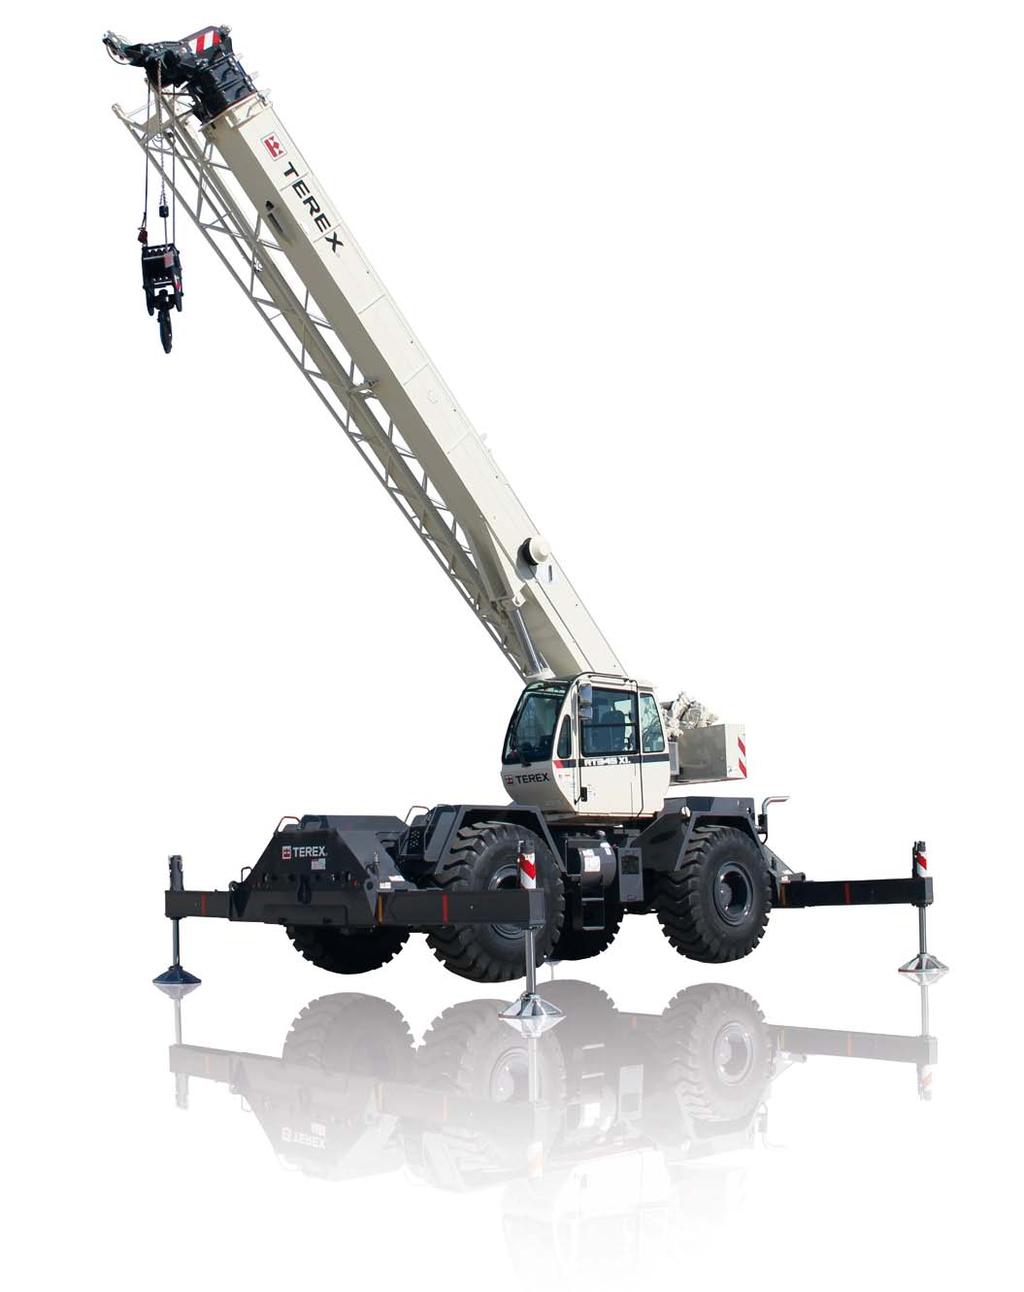 USt Lifting Capacity Rough Terrain Crane Datasheet Imperial Features: Rated